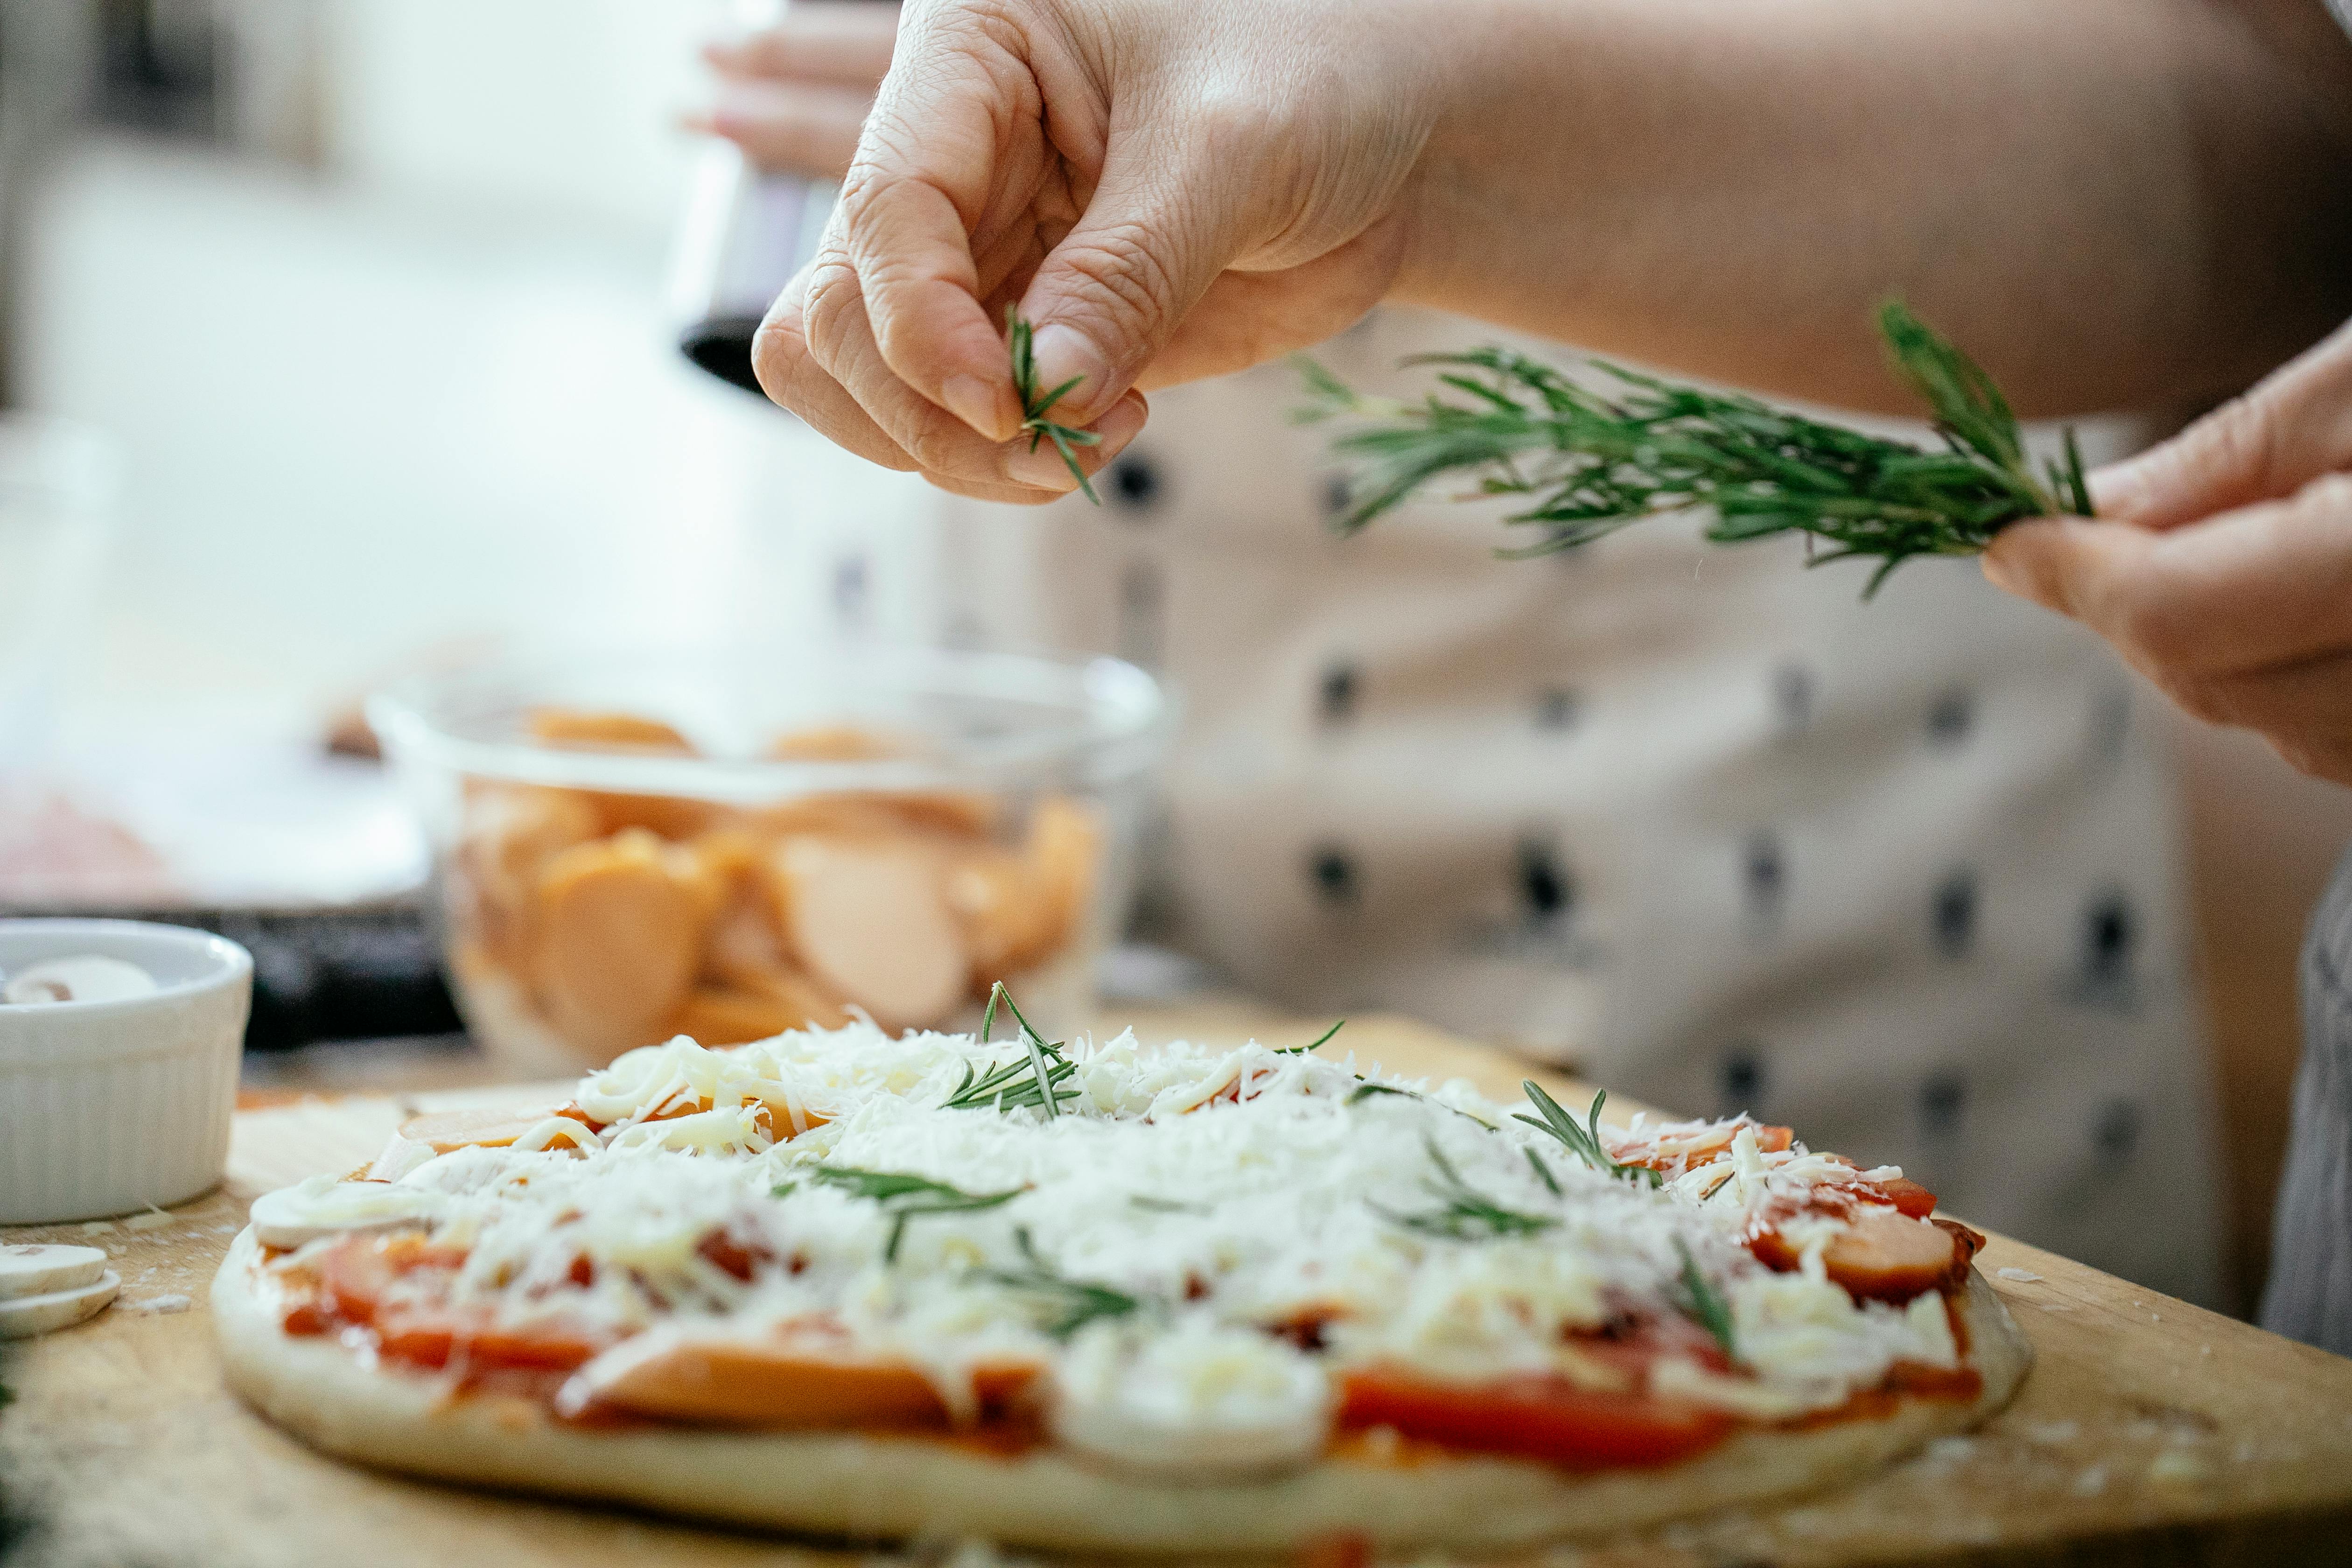 crop person seasoning pizza with rosemary